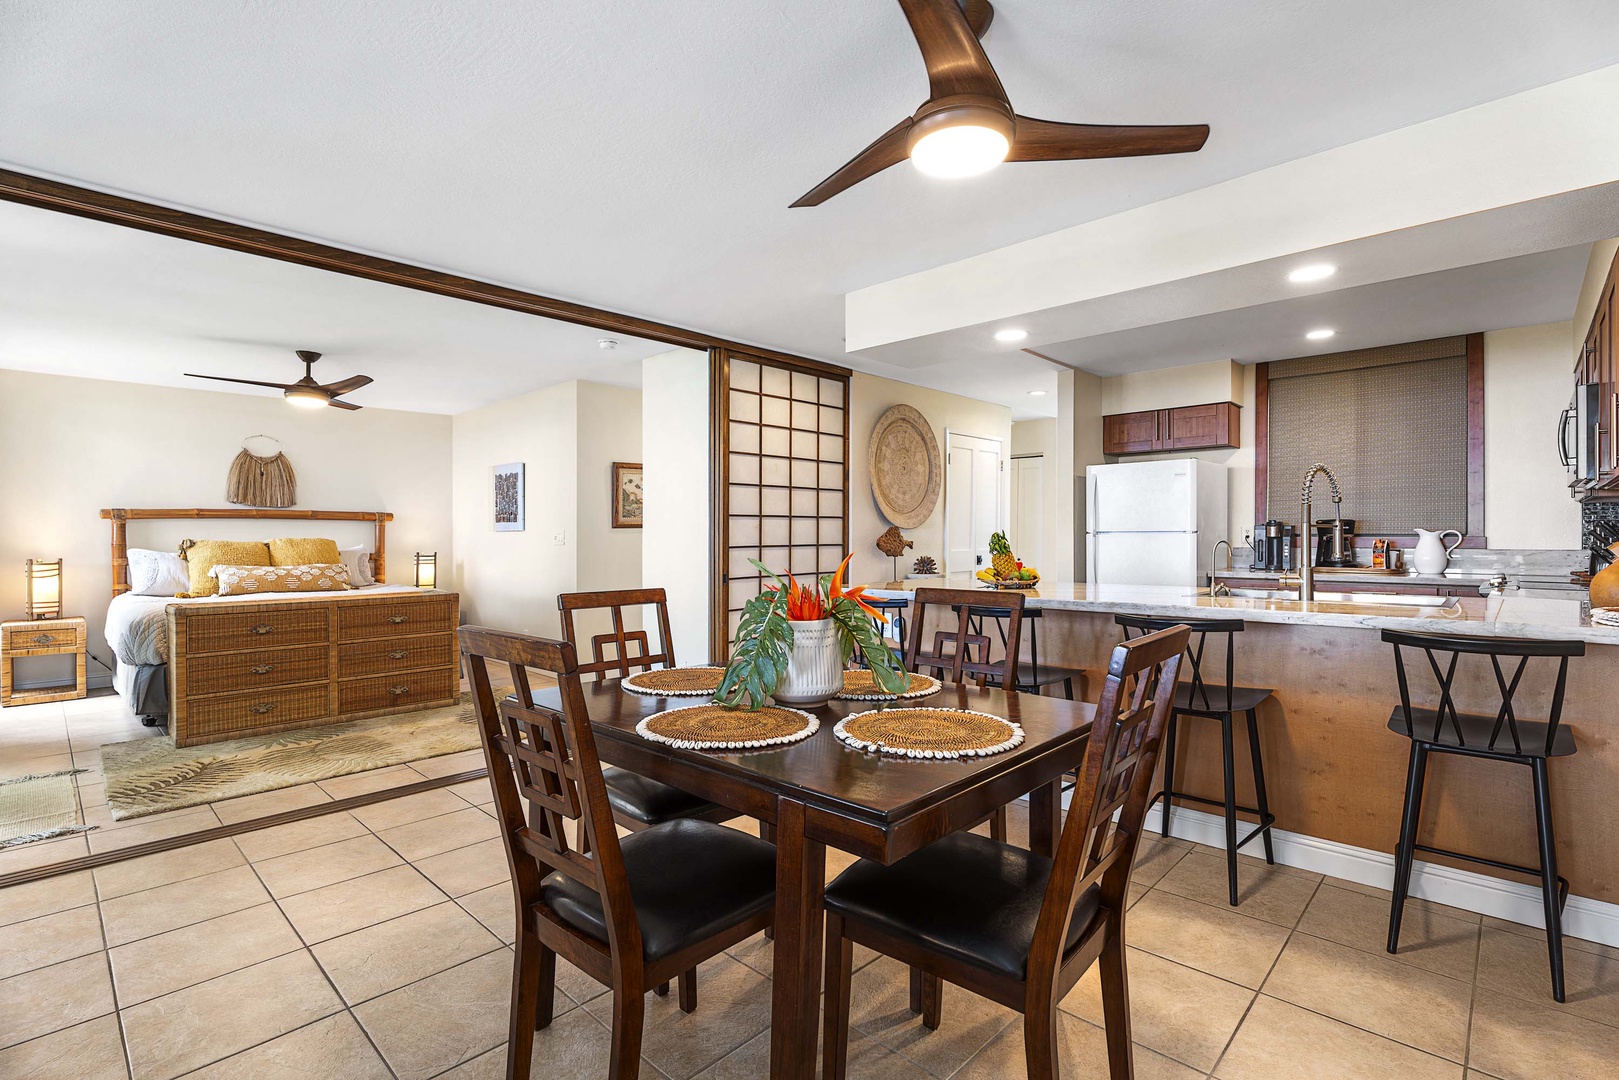 Kailua Kona Vacation Rentals, Keauhou Kona Surf & Racquet 2101 - The kitchen area is right beside the dining, a seamless blend of spaces designed for flow and communal living.